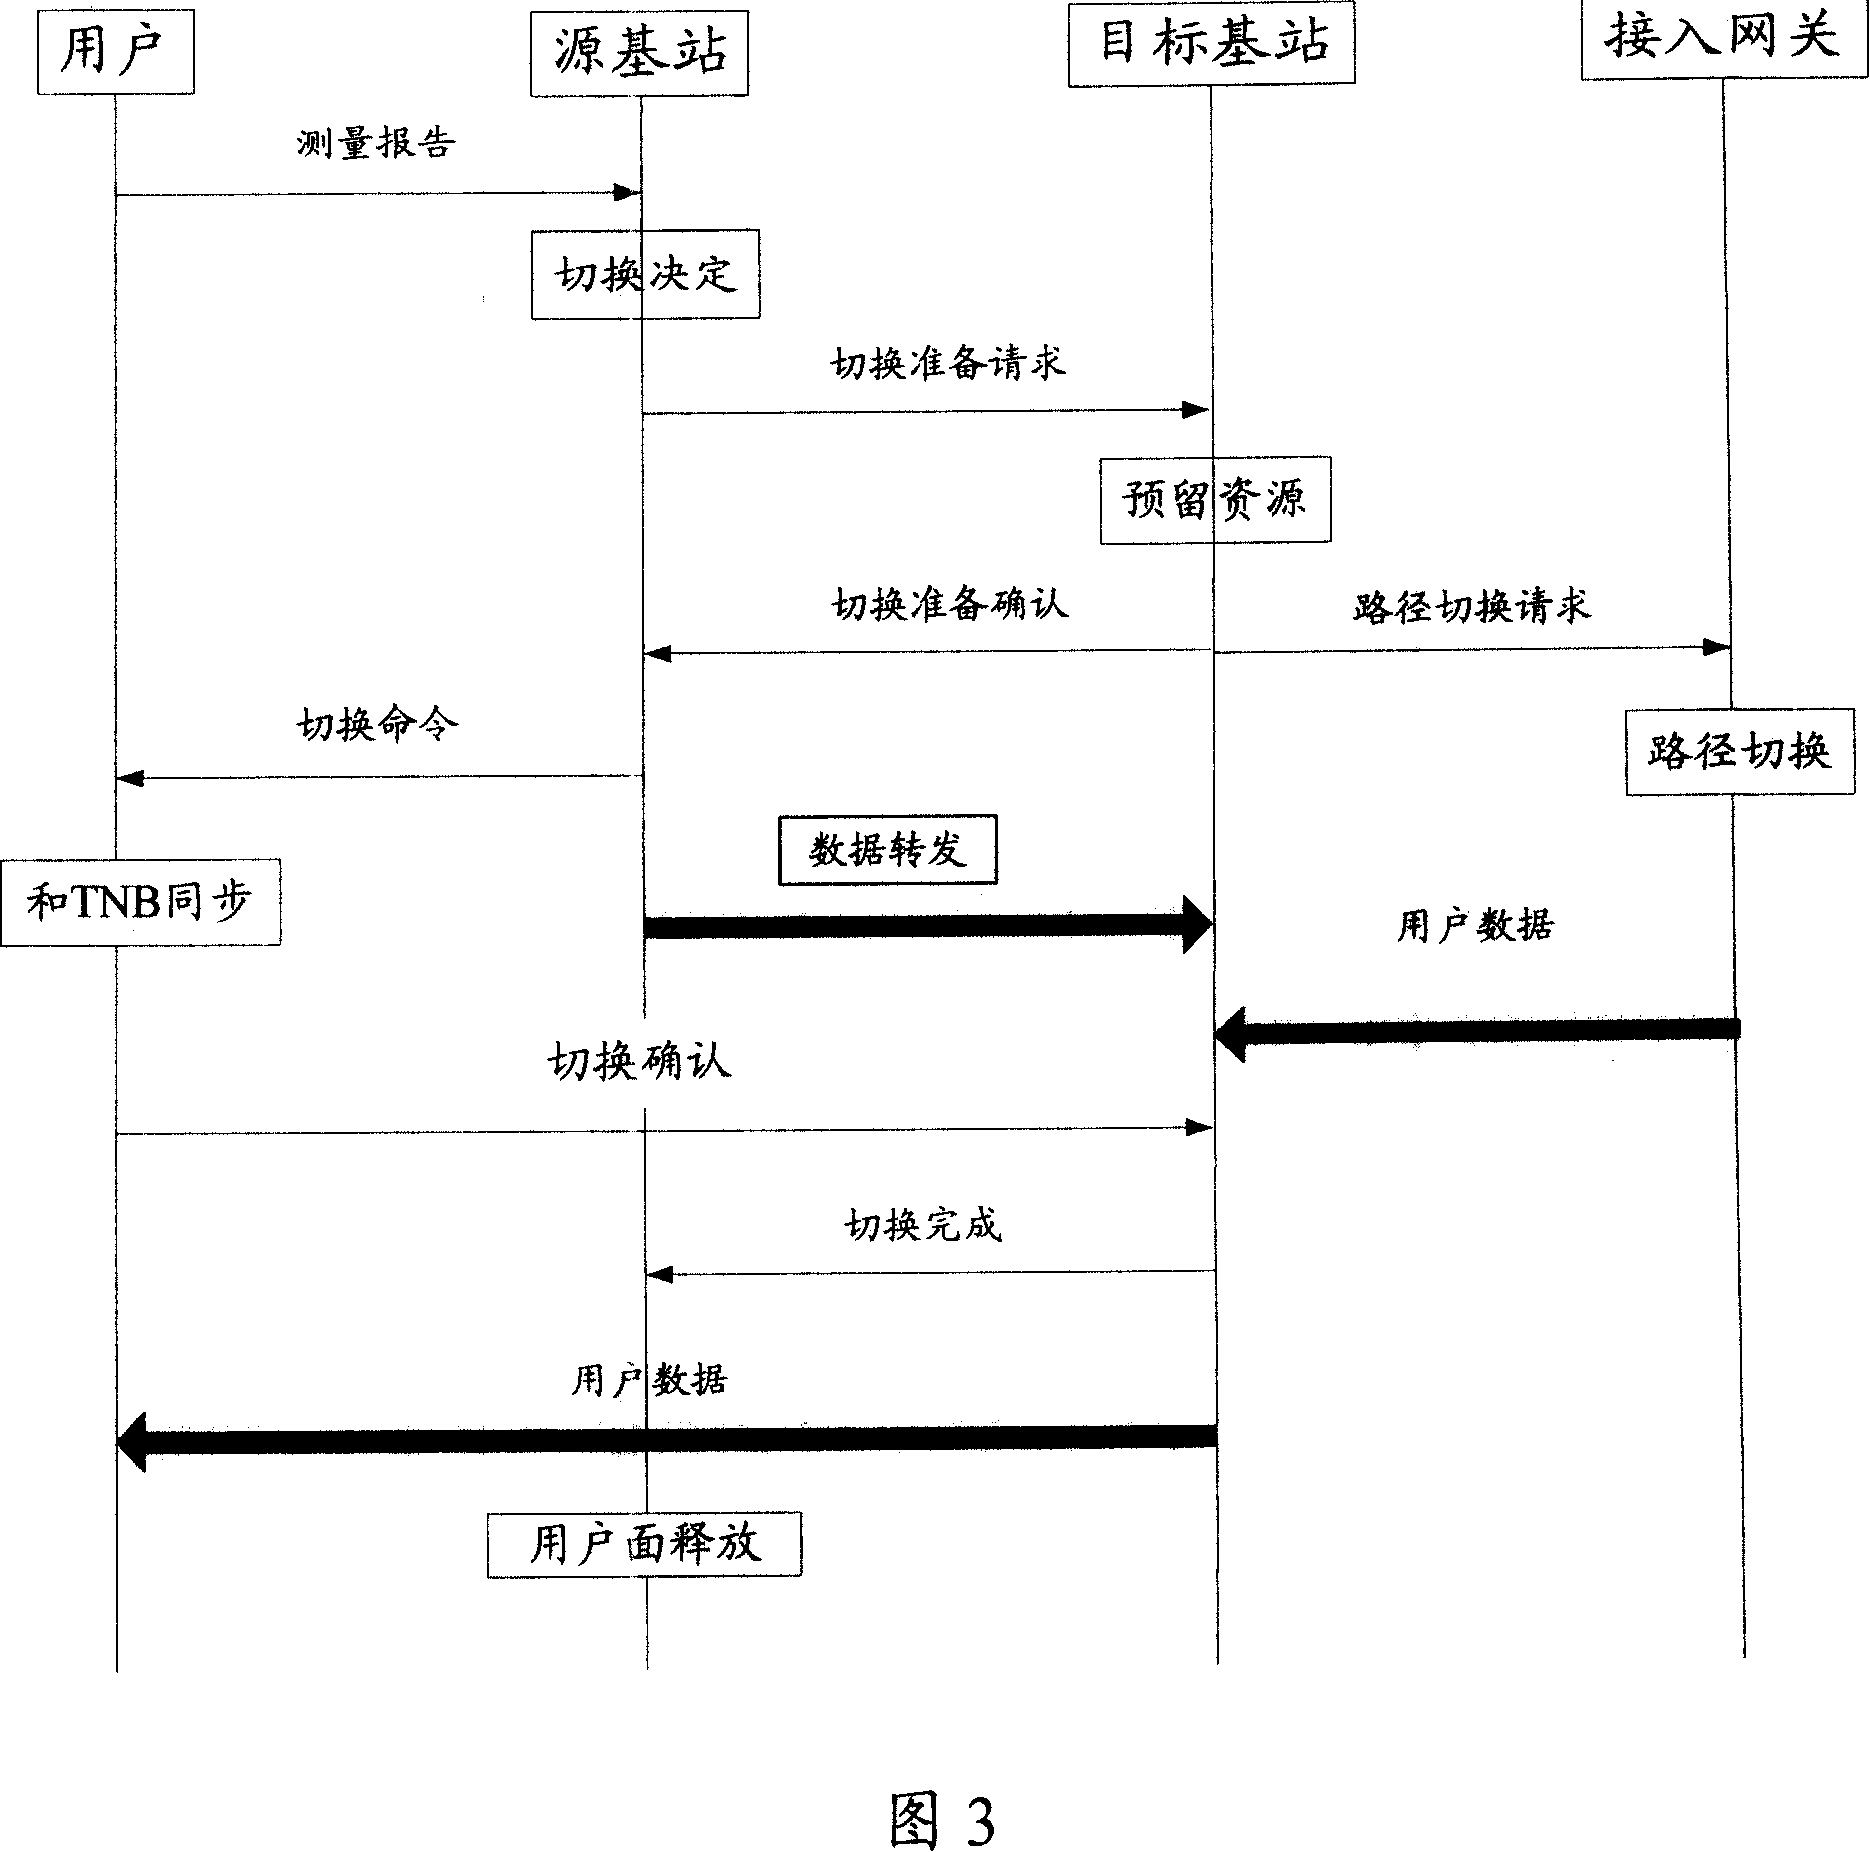 Method and system for repeating data during switching course